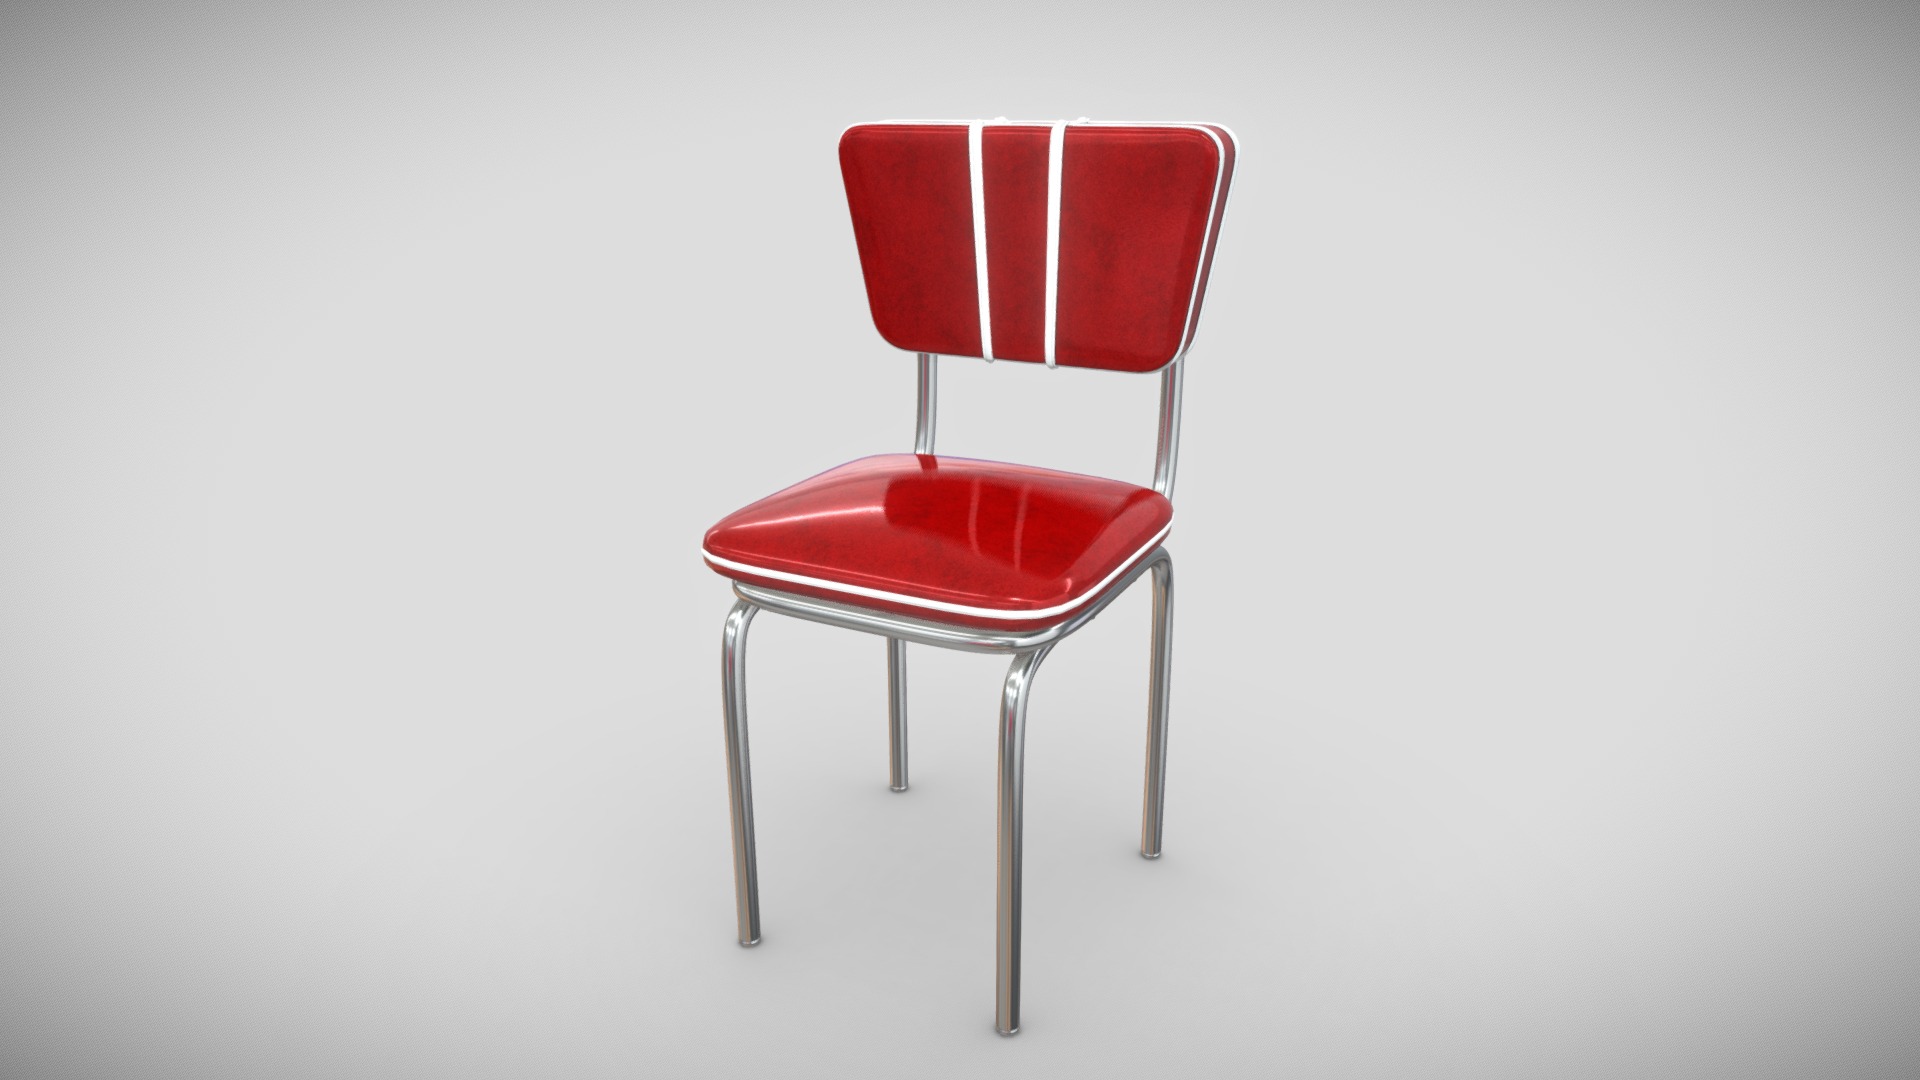 3D model Retro Vintage Diner Chair - This is a 3D model of the Retro Vintage Diner Chair. The 3D model is about a red chair with a white background.